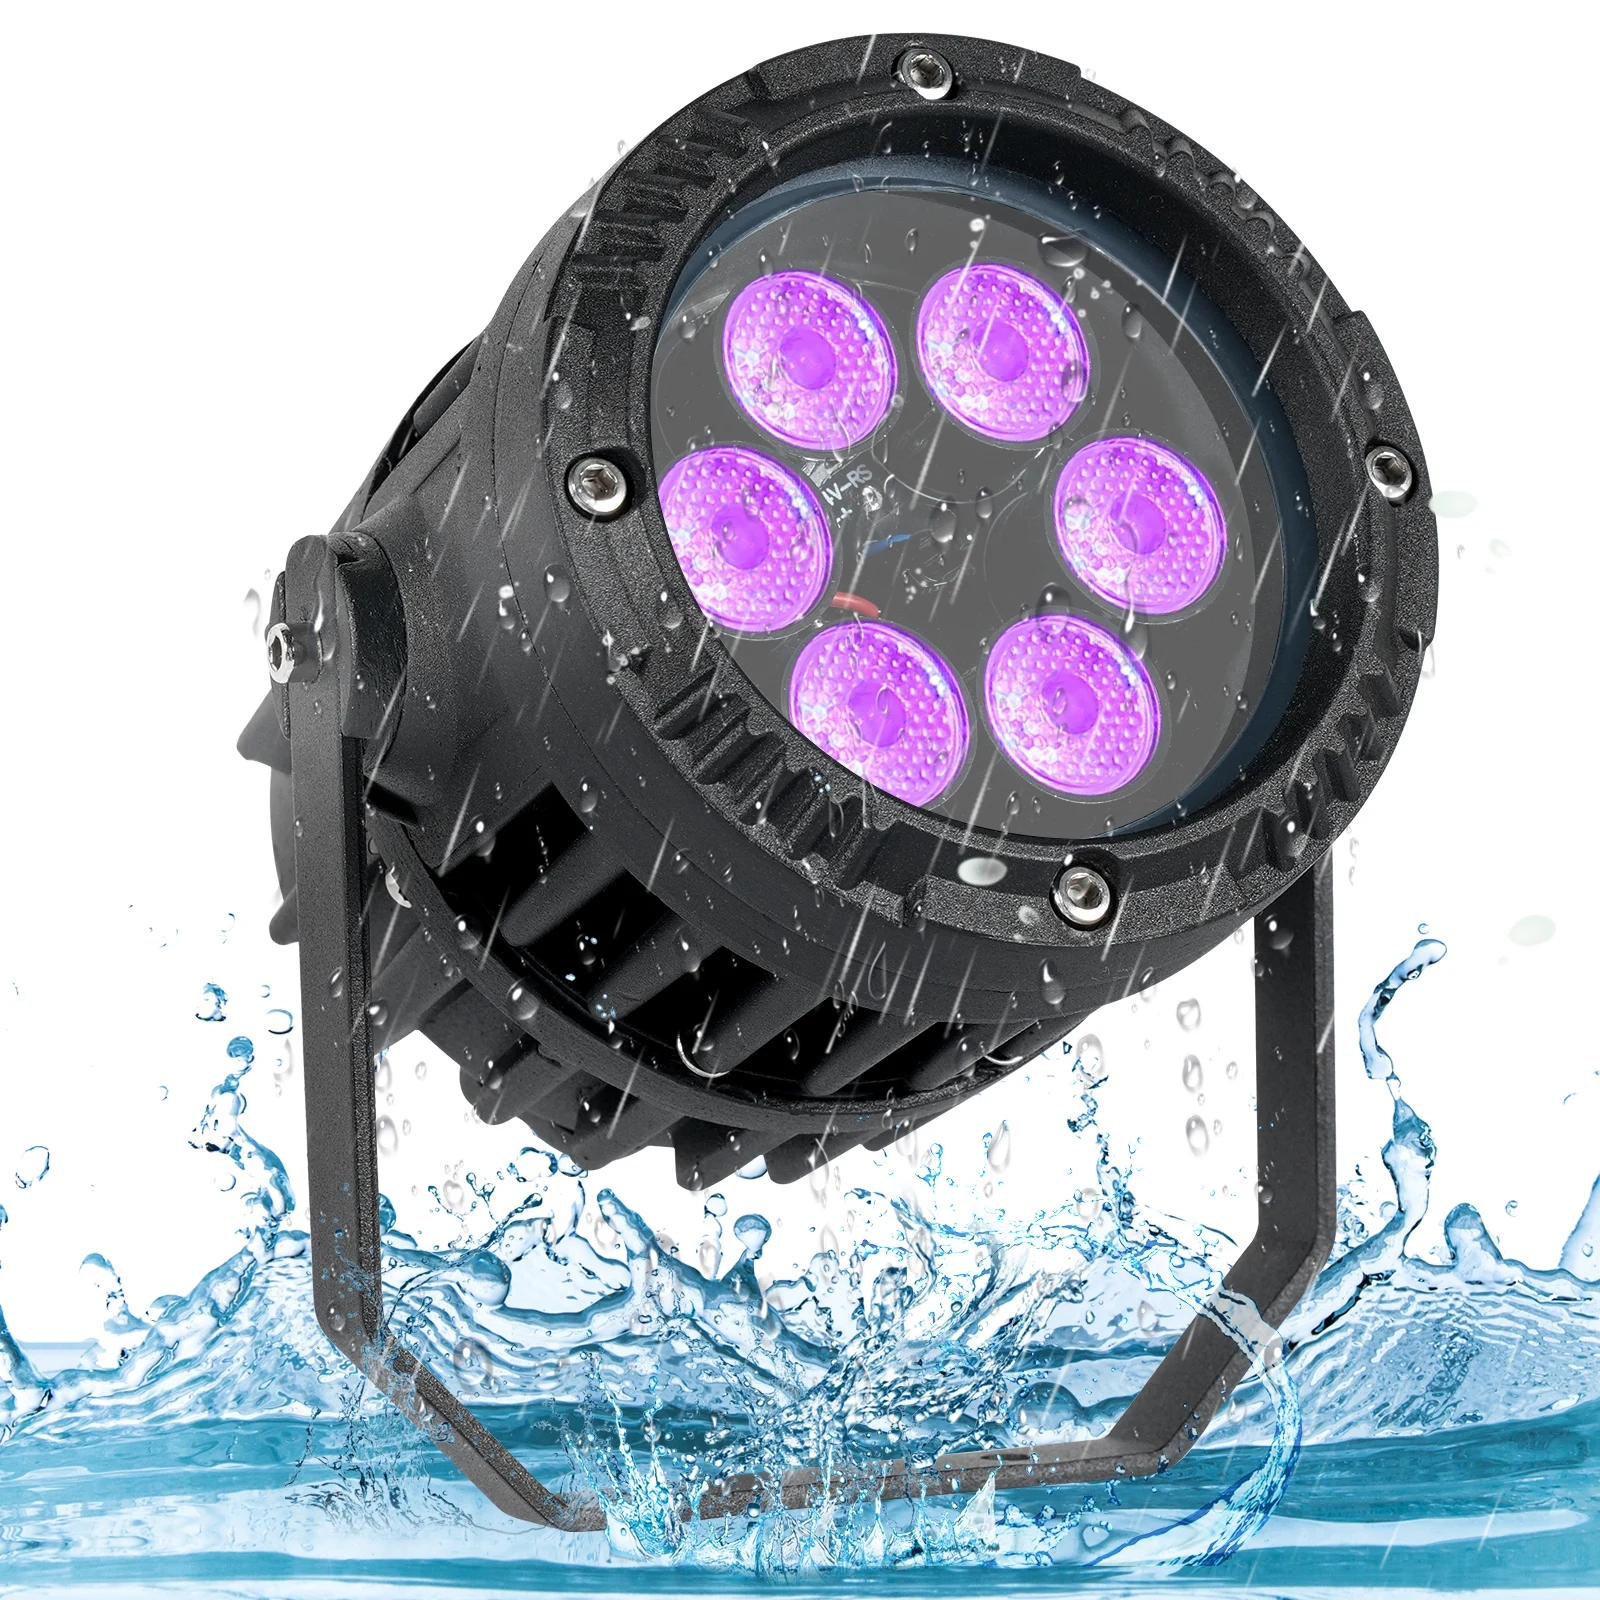 

20W Waterproof RGB Par Lamp With Remote Control Stage Light For Dj Concert Party Weddings Nightclub outdoor Par Lights